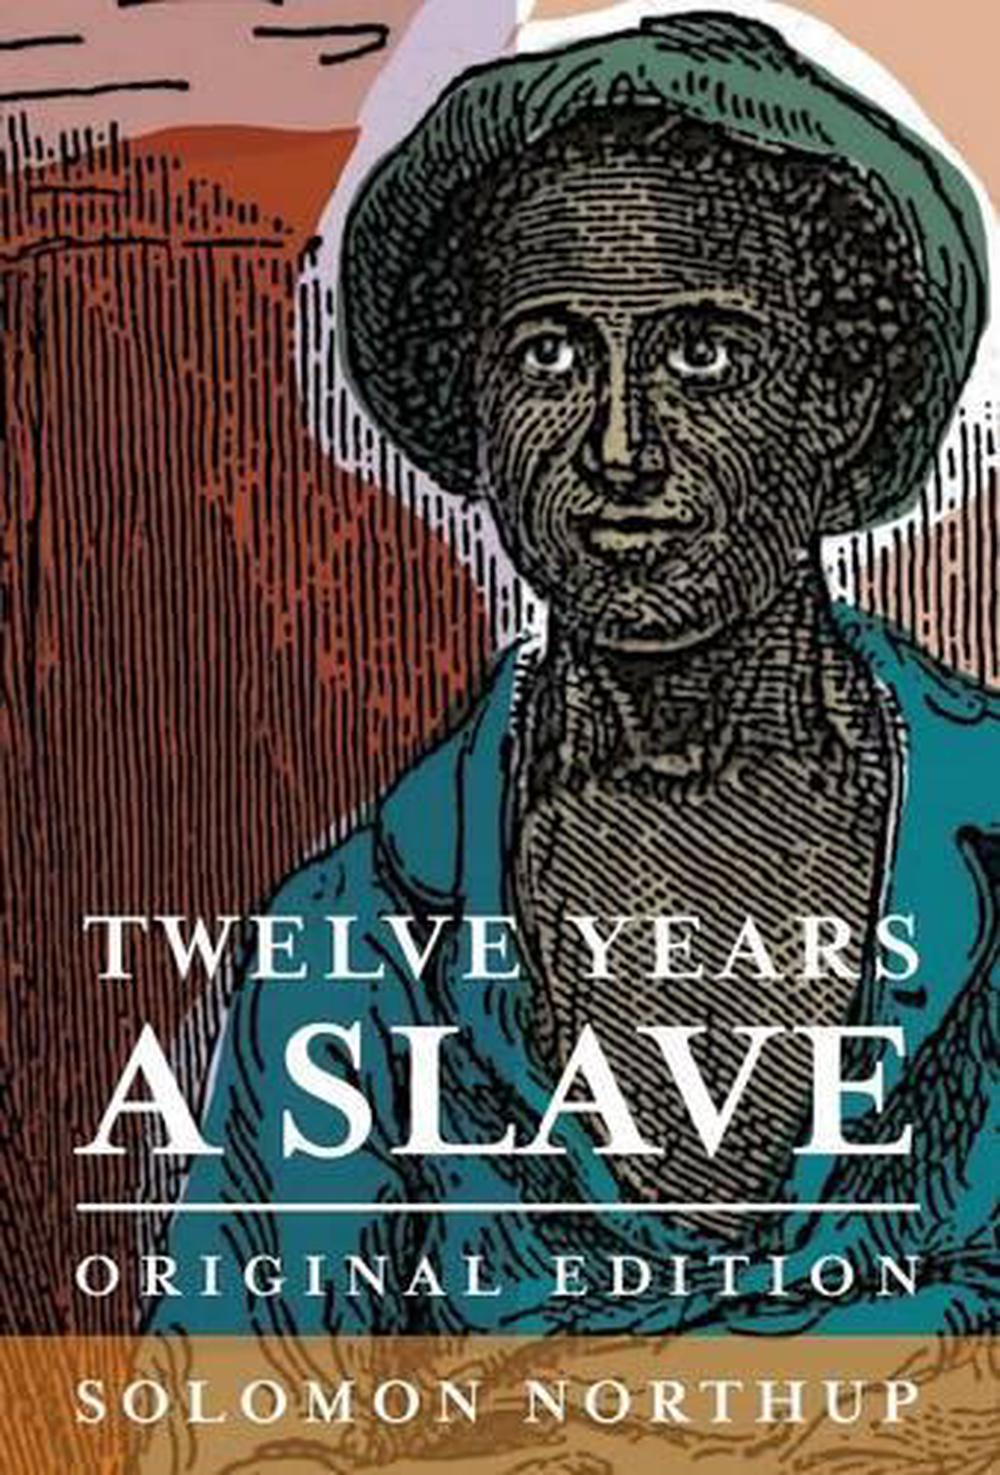 12 years a slave book